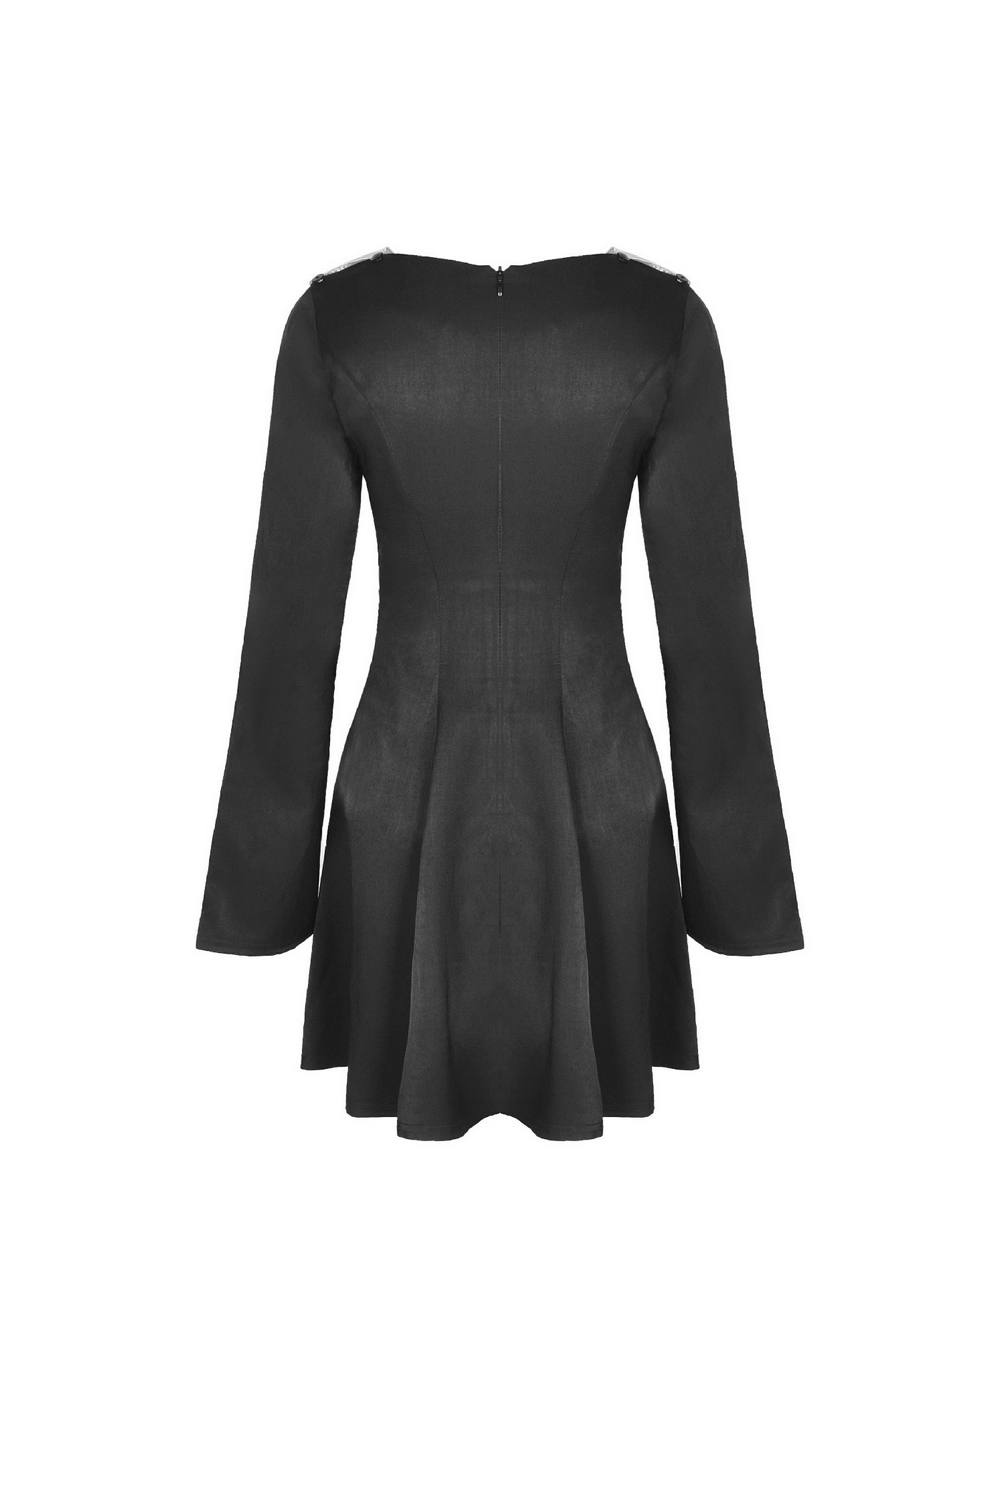 Vintage Lace Collar Dress with Embroidery Detailing